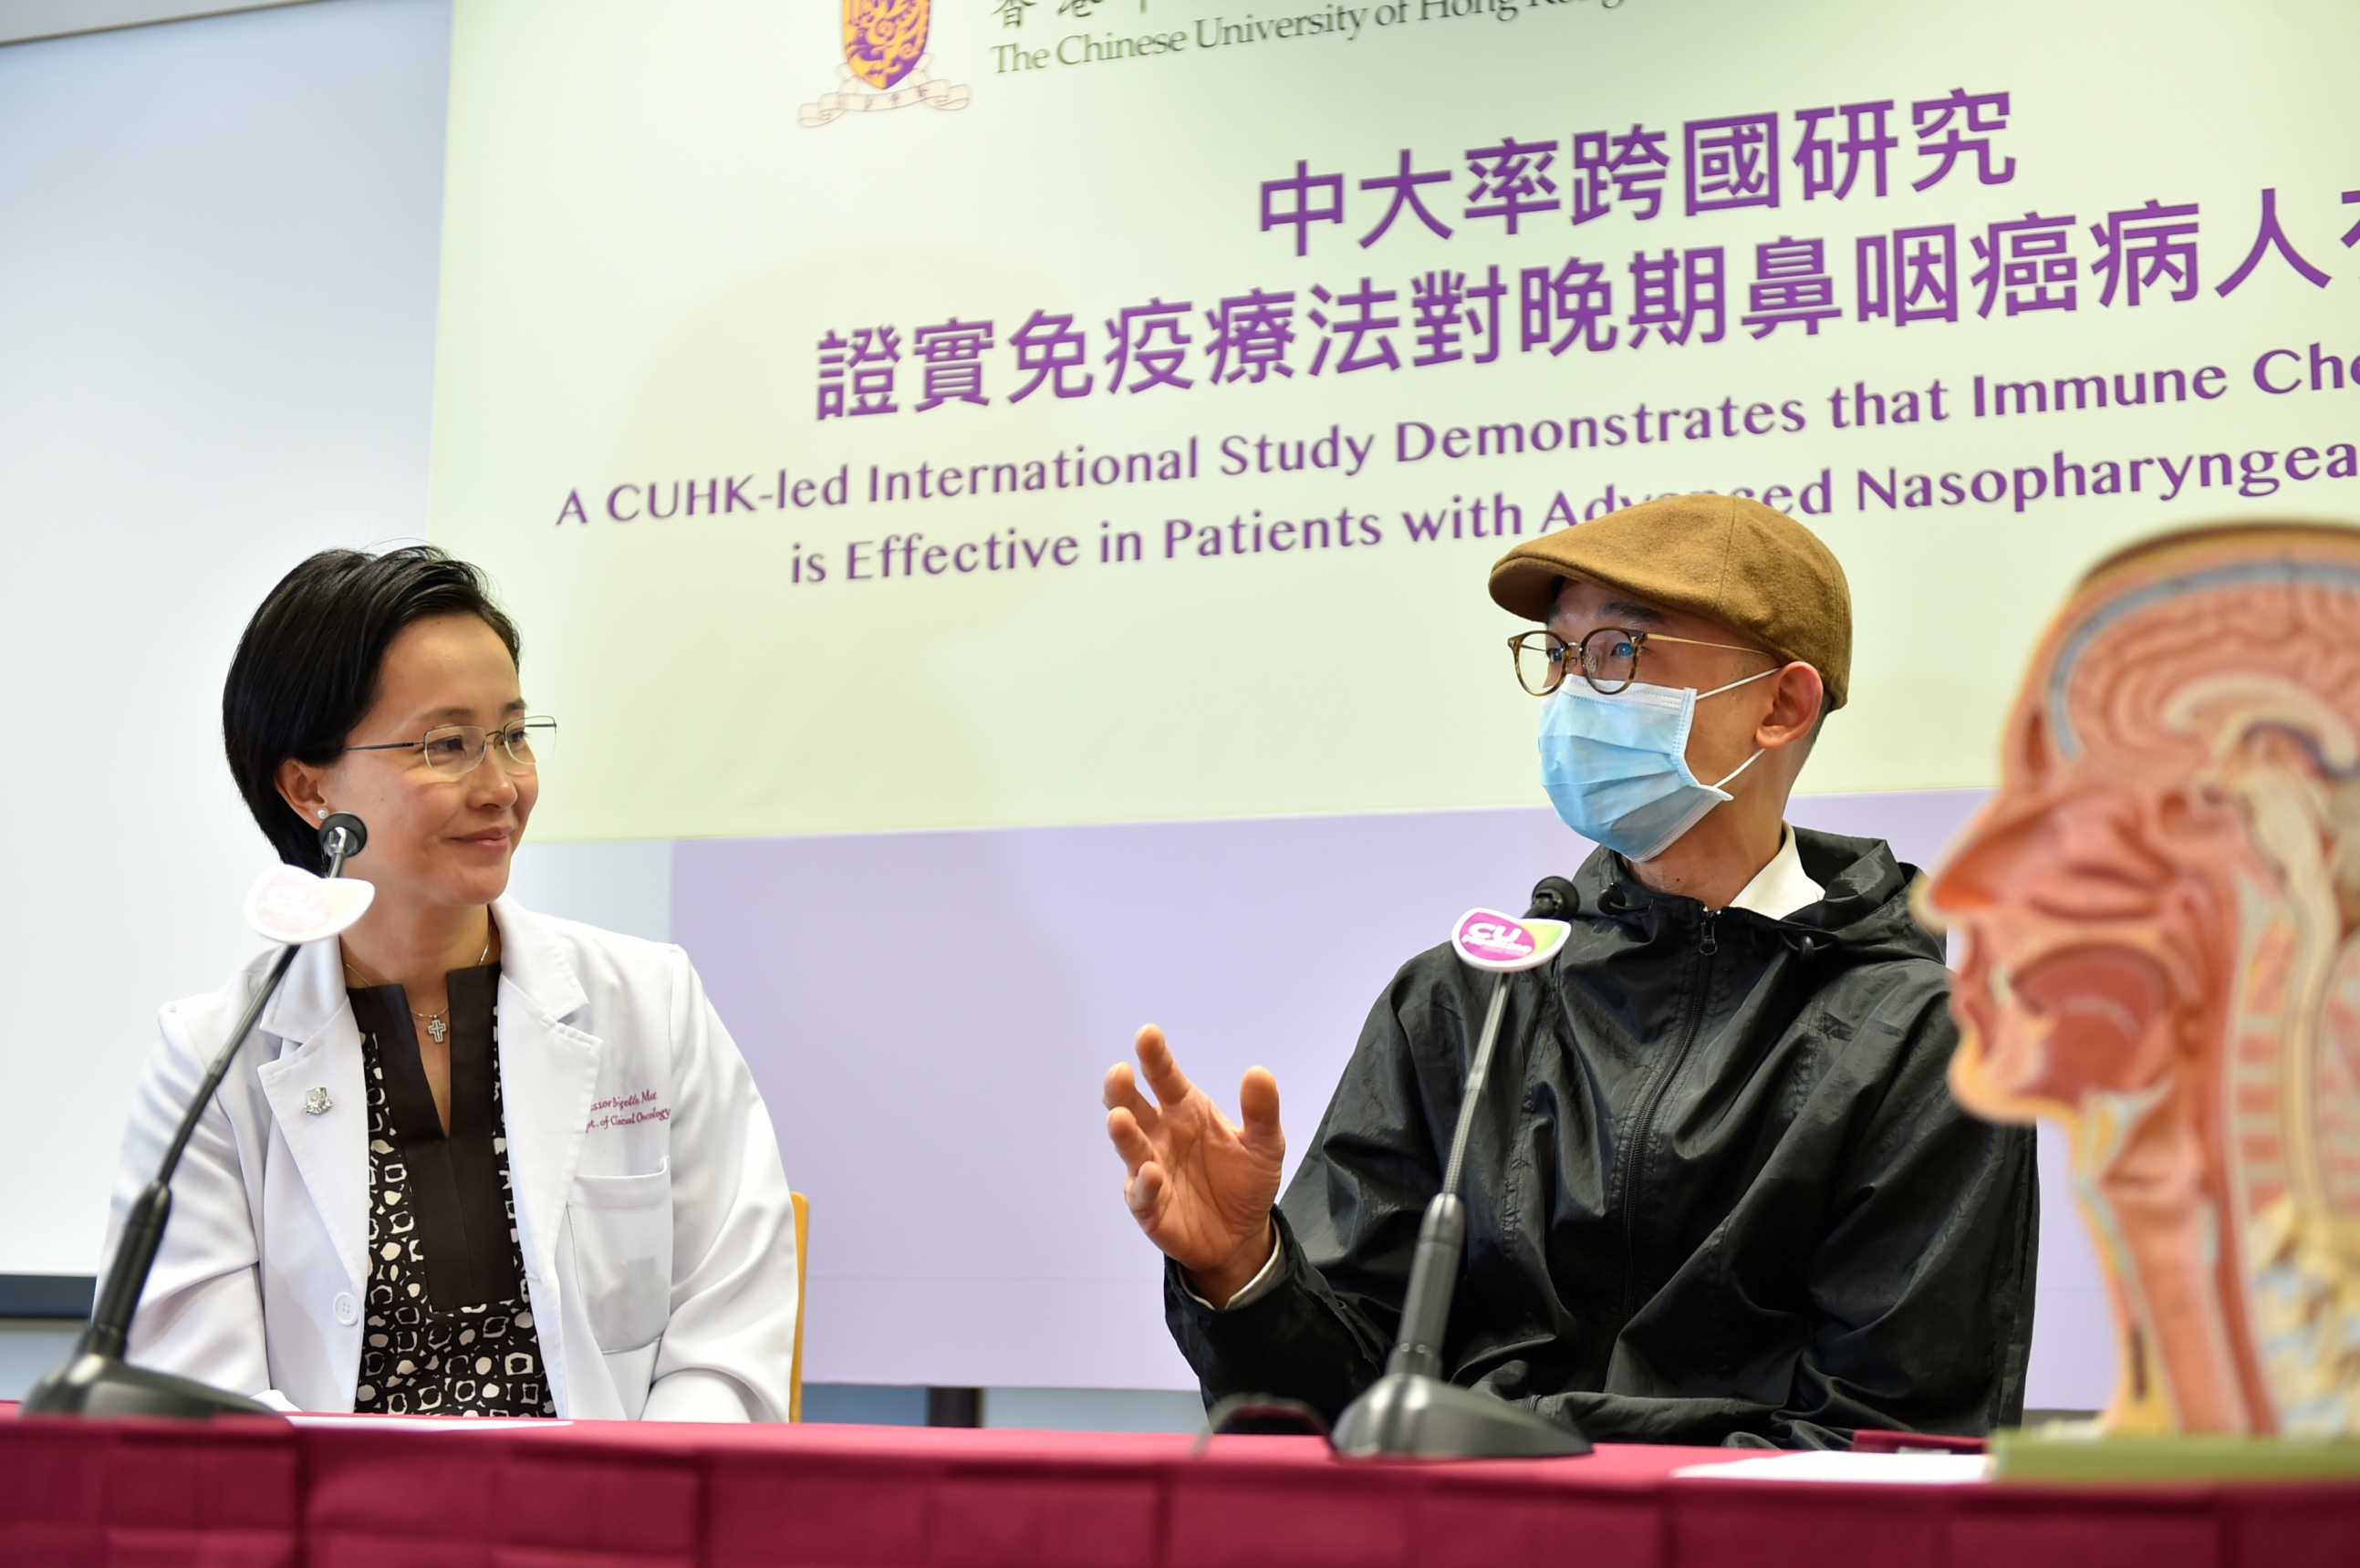 Mr CHAN (pseudo name, right), an NPC patient, states that his physical condition and life quality were not seriously affected during immunotherapy, and there were fewer side effects than chemotherapy